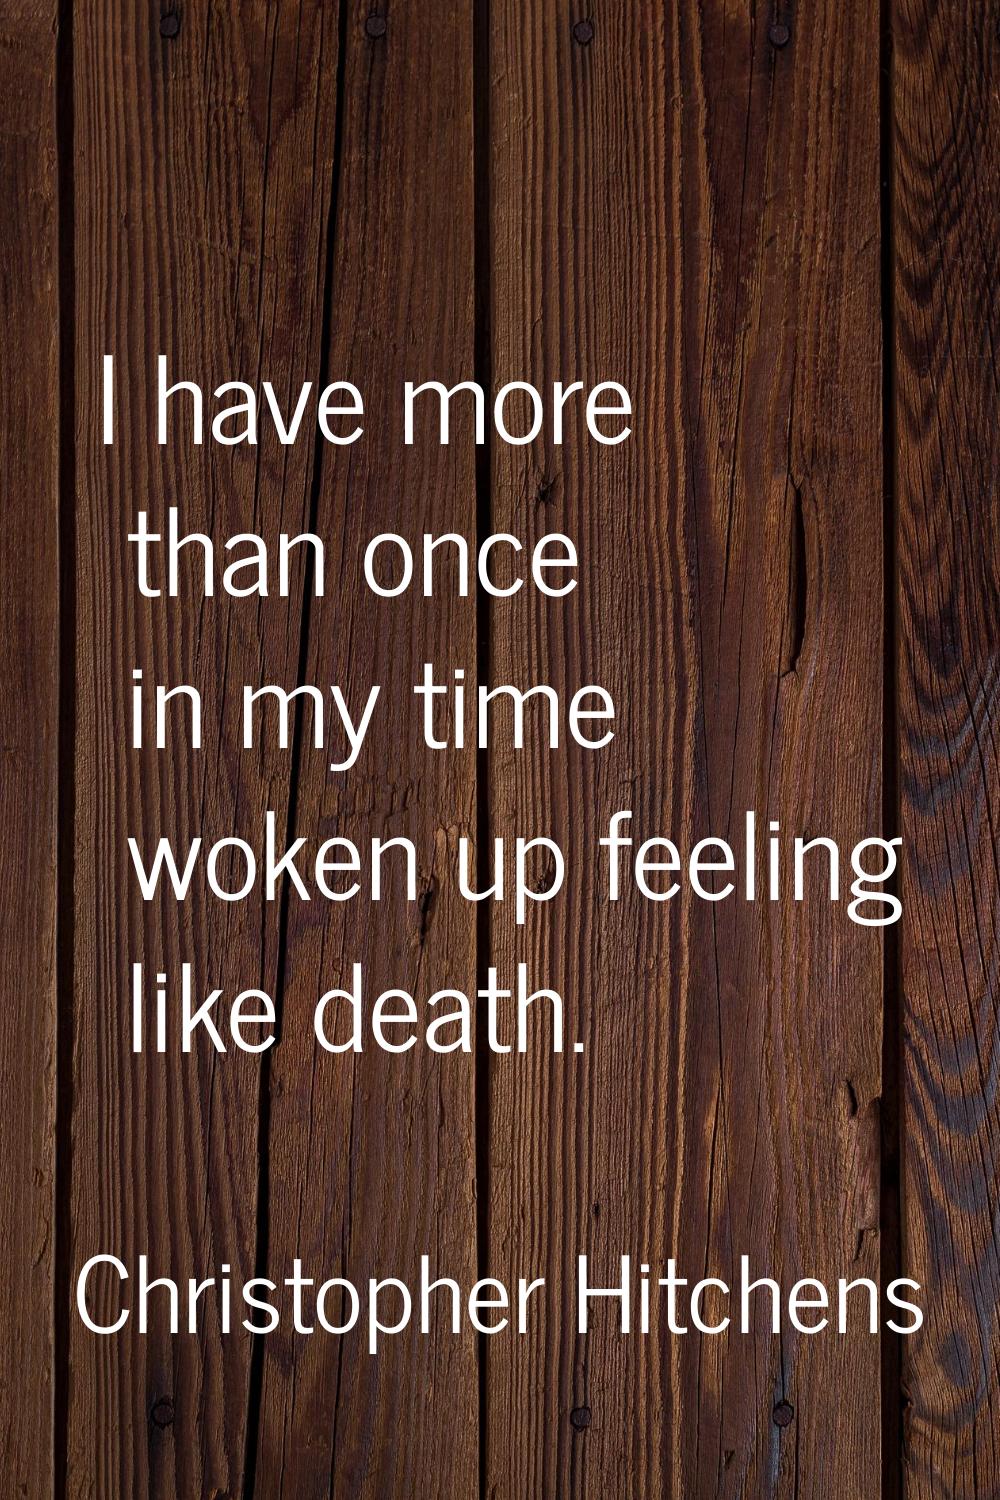 I have more than once in my time woken up feeling like death.